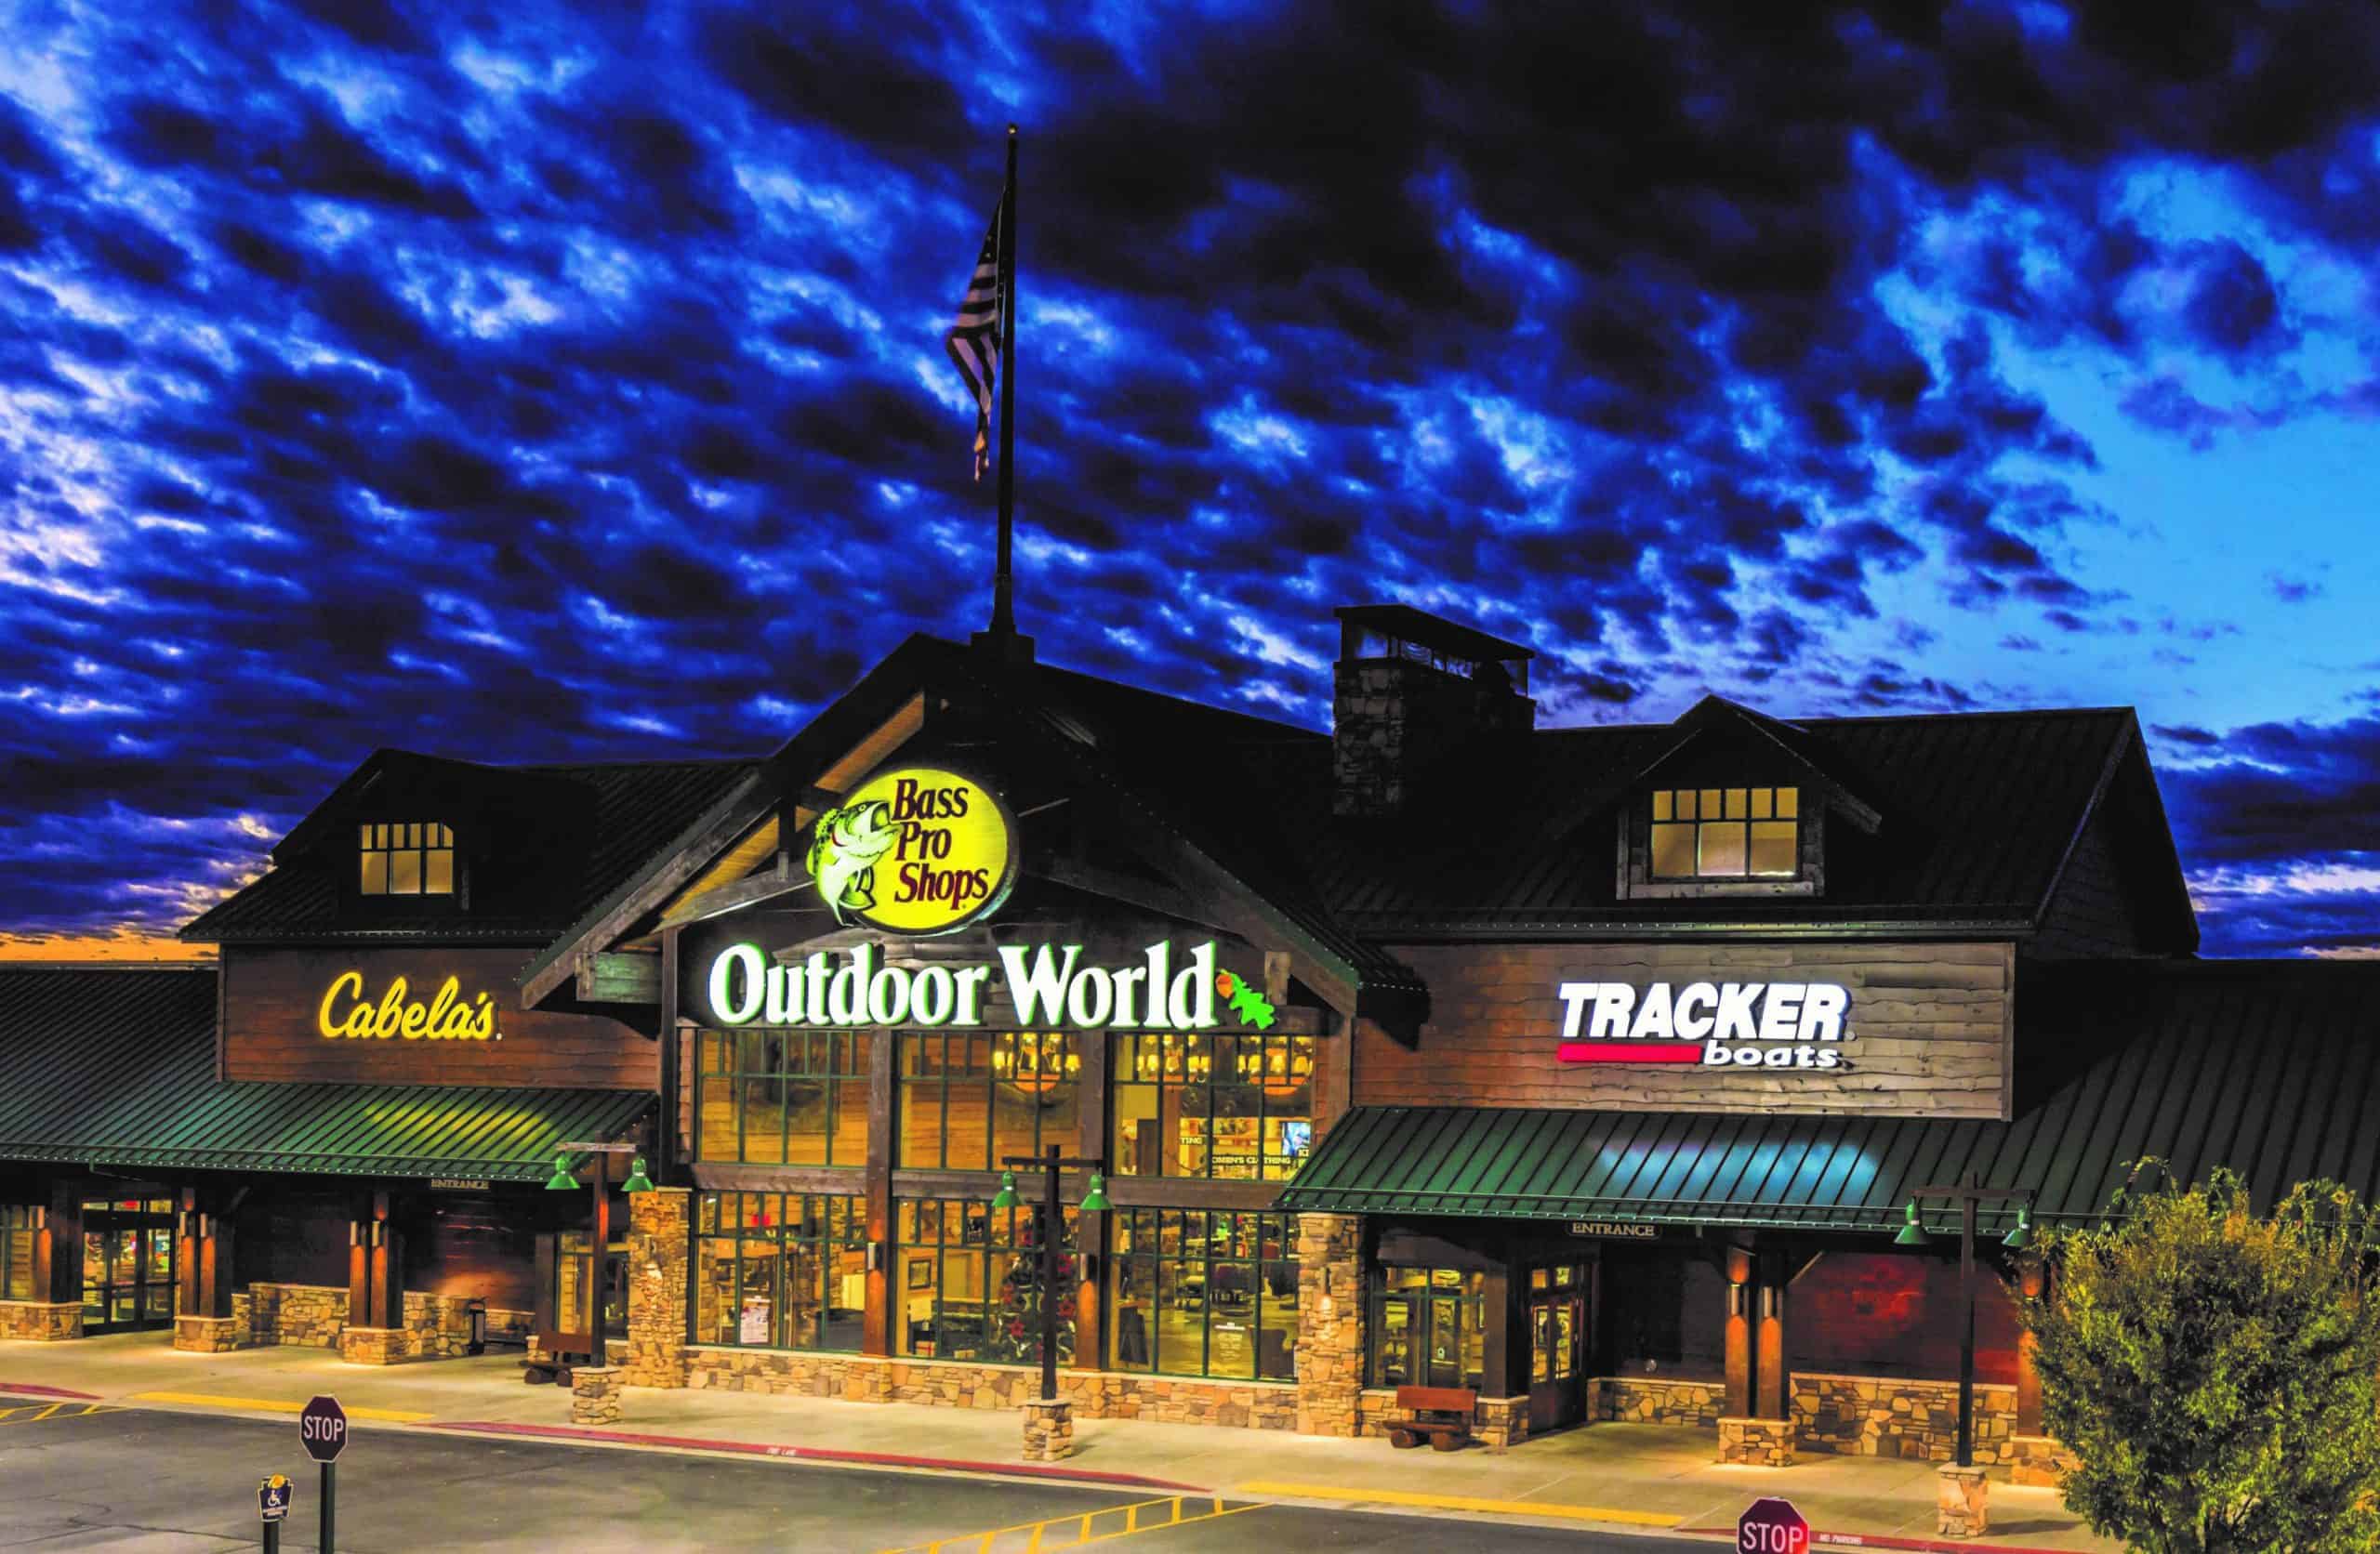 Newsweek recognizes Bass Pro Shops and Cabela's with “America's